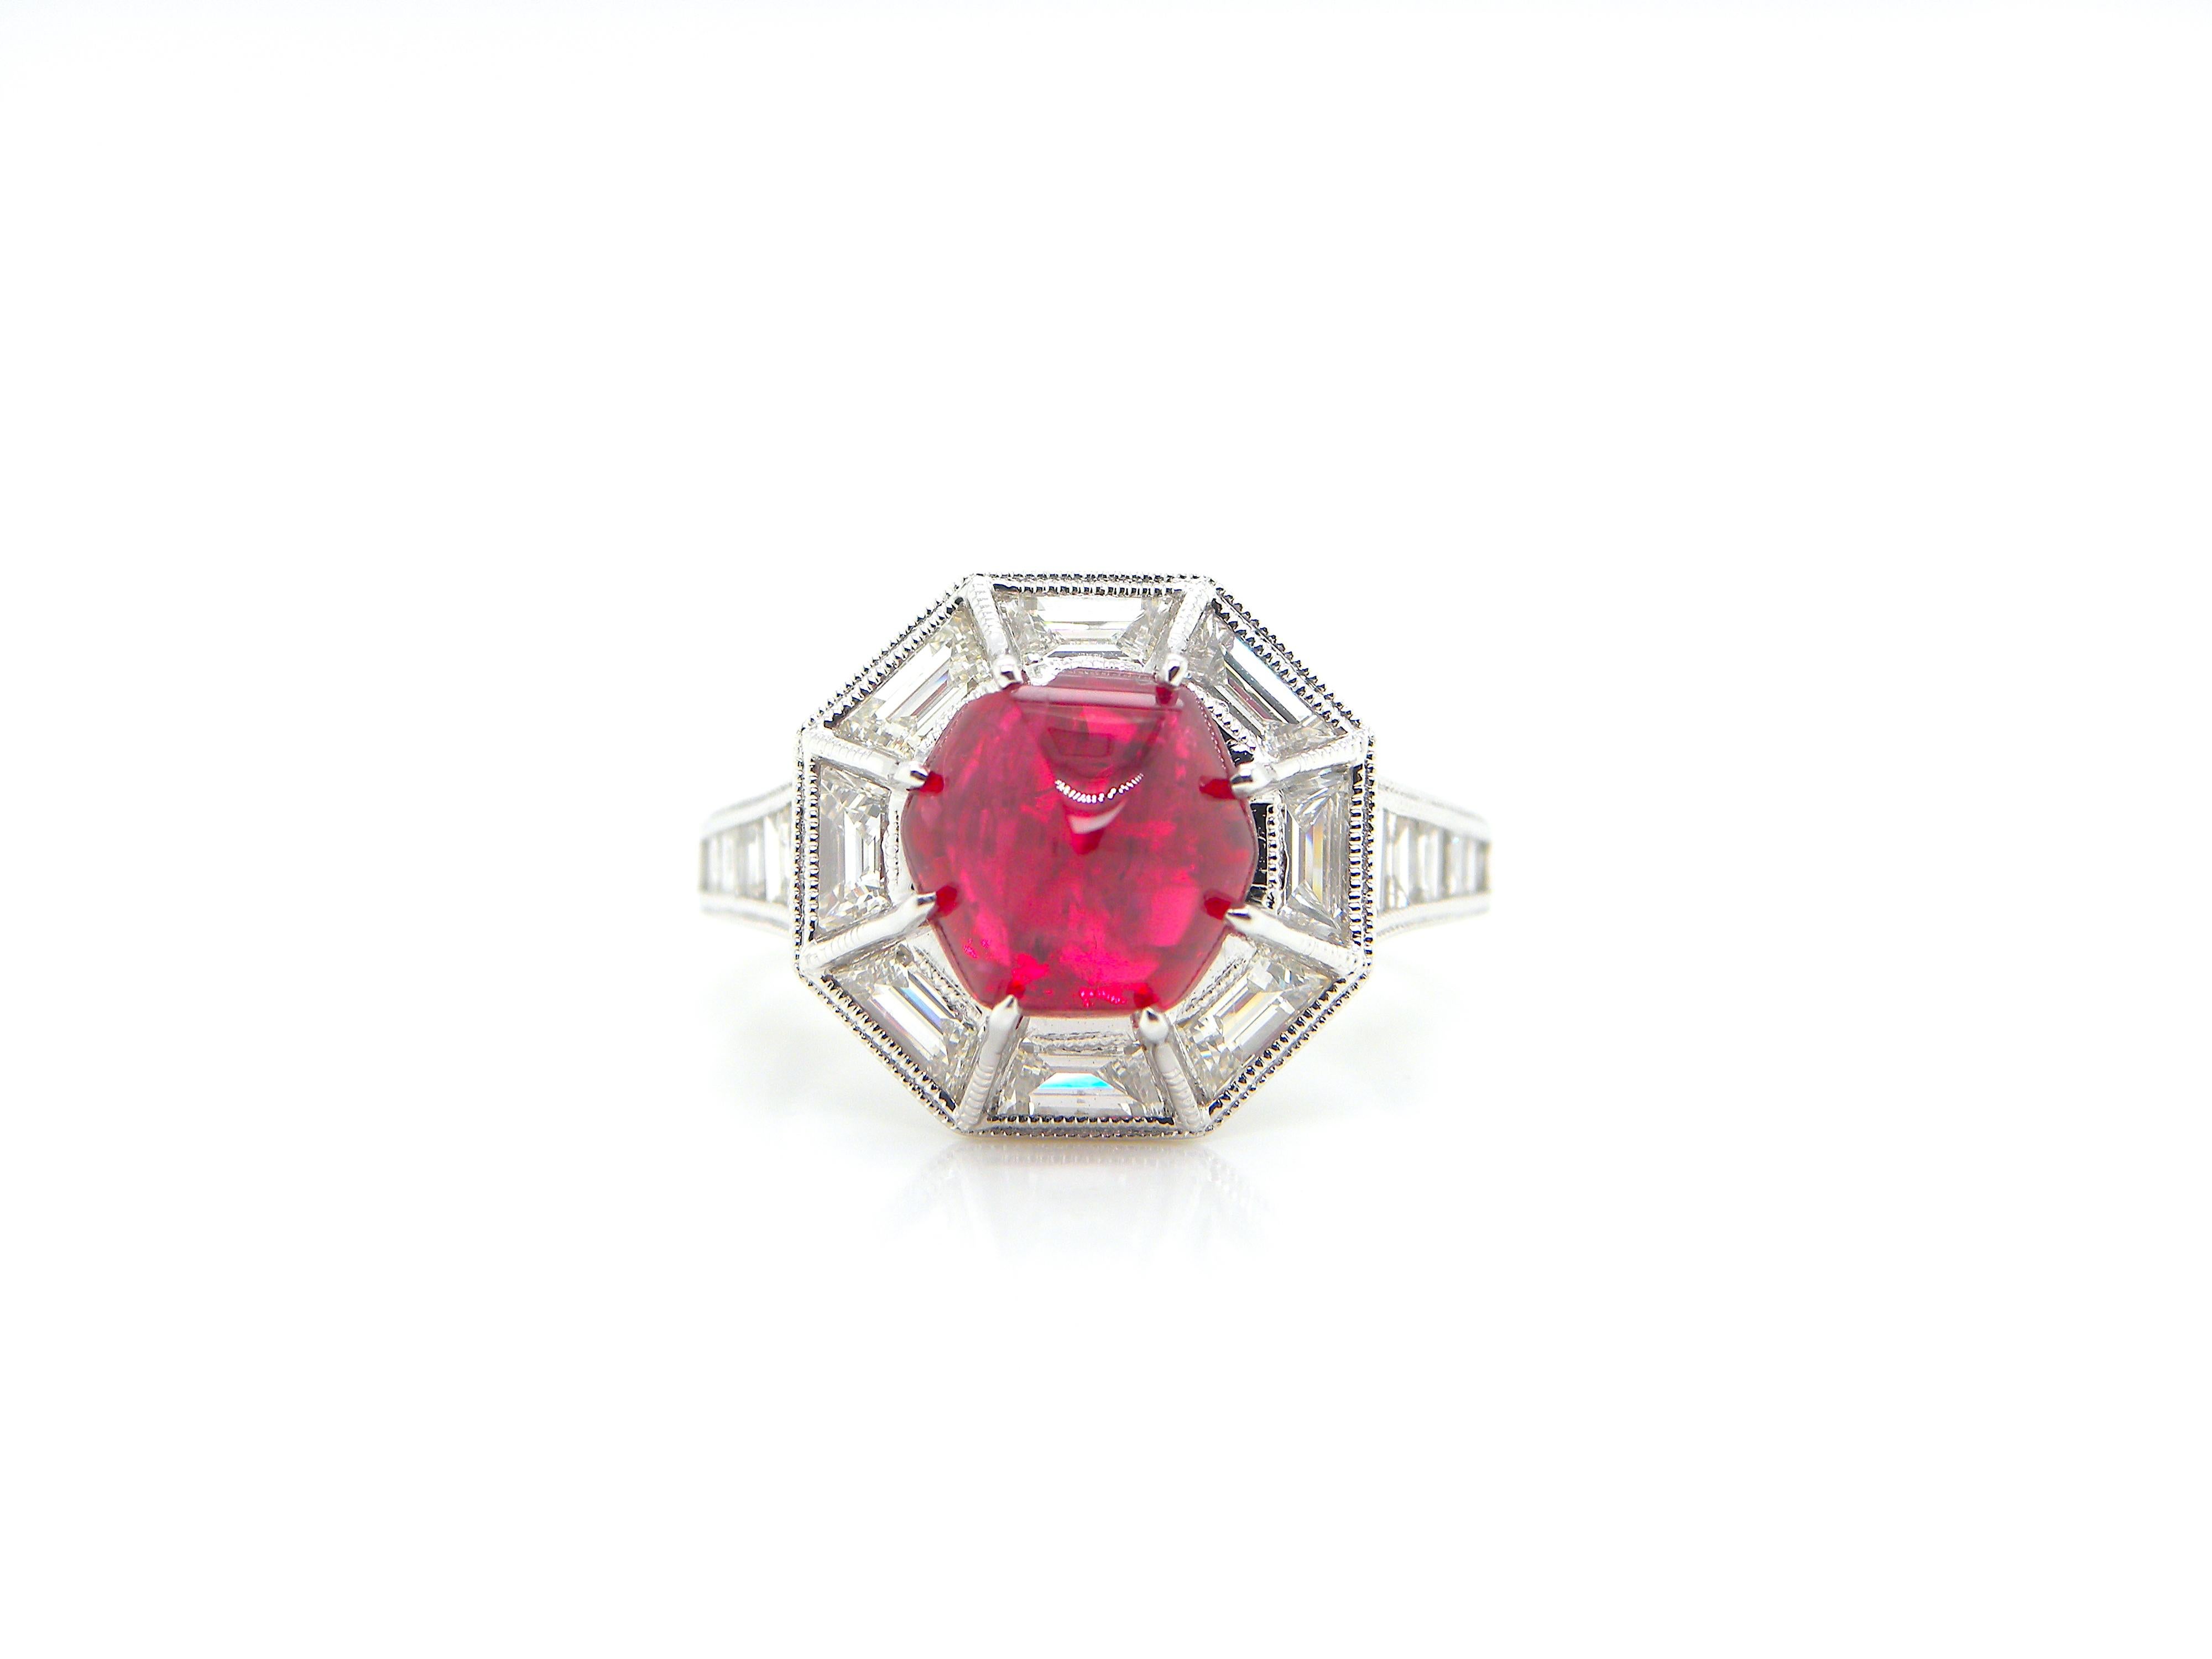 Contemporary 3.04 Carat GIA Certified Burma No Heat Vivid Red Spinel and White Diamond Ring